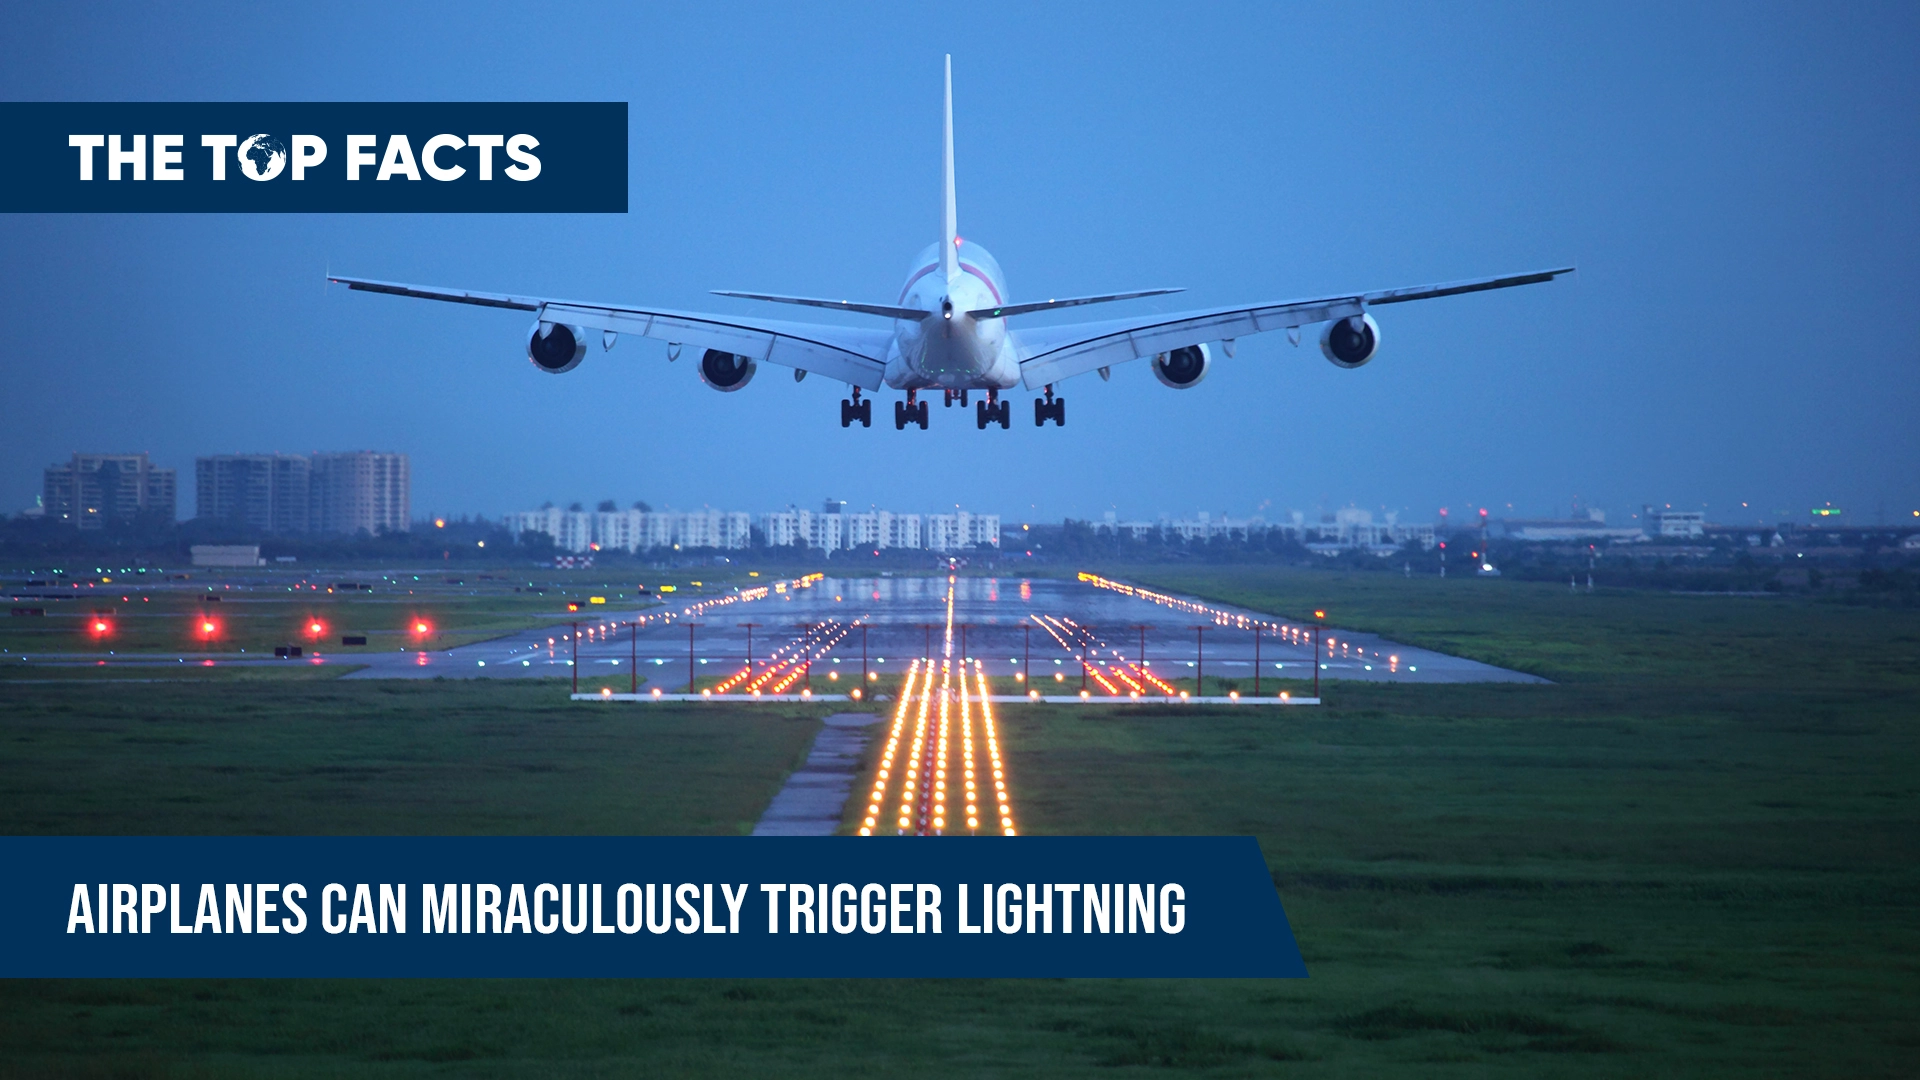 Airplanes Can Miraculously trigger lightning